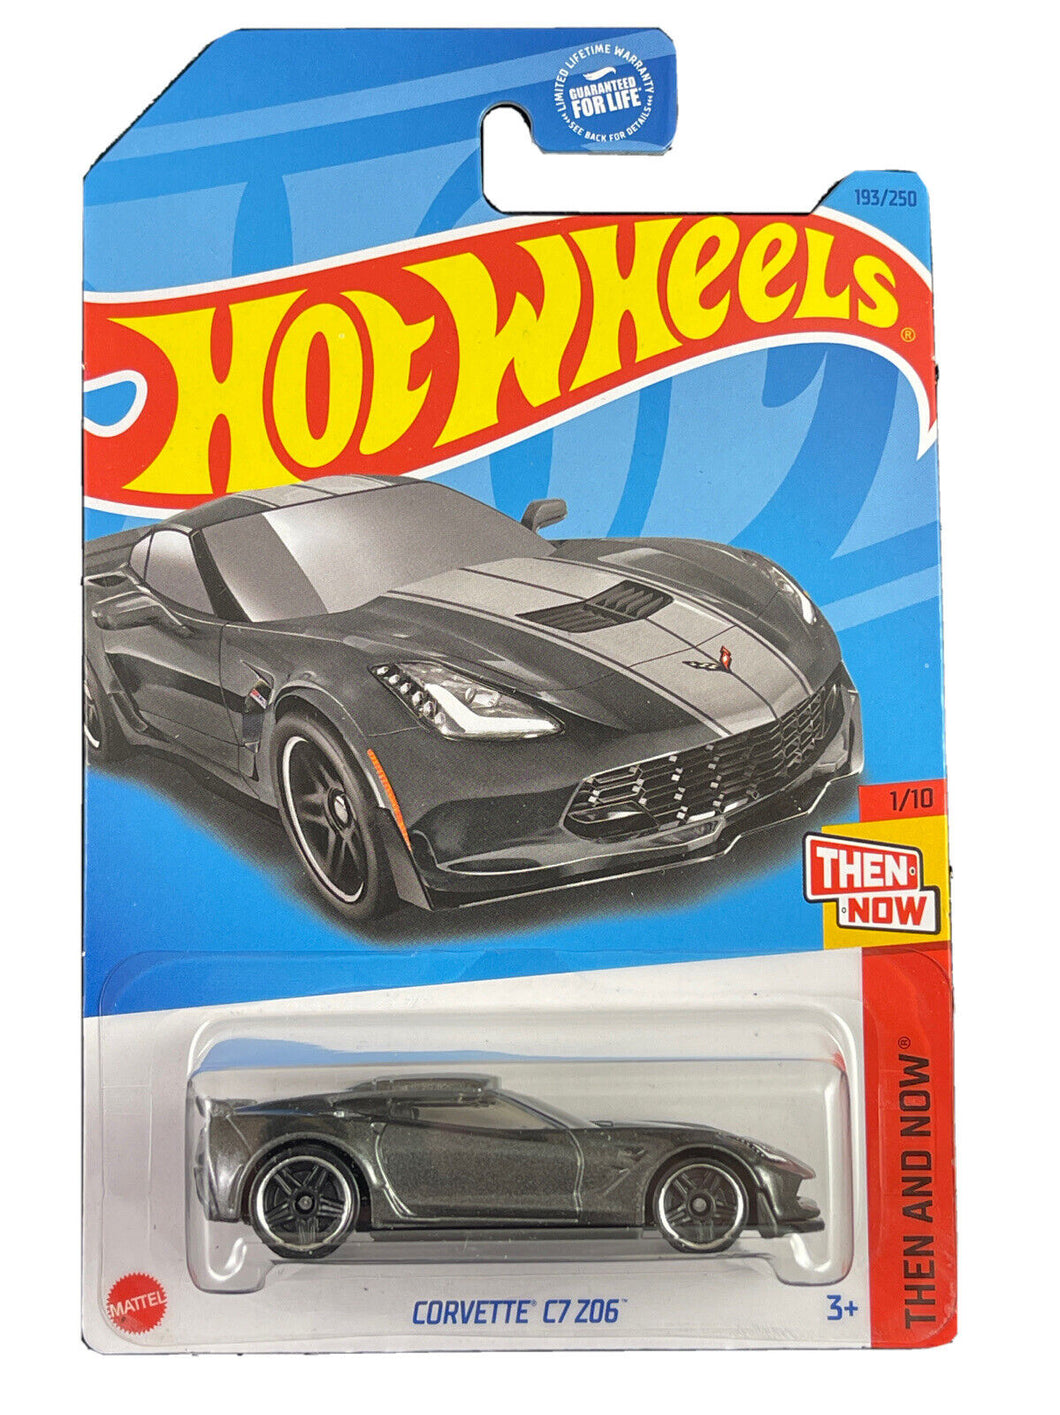 2023 Hot Wheels Corvette C7 Z06 (Gray) Then And Now 1/10, 193/250